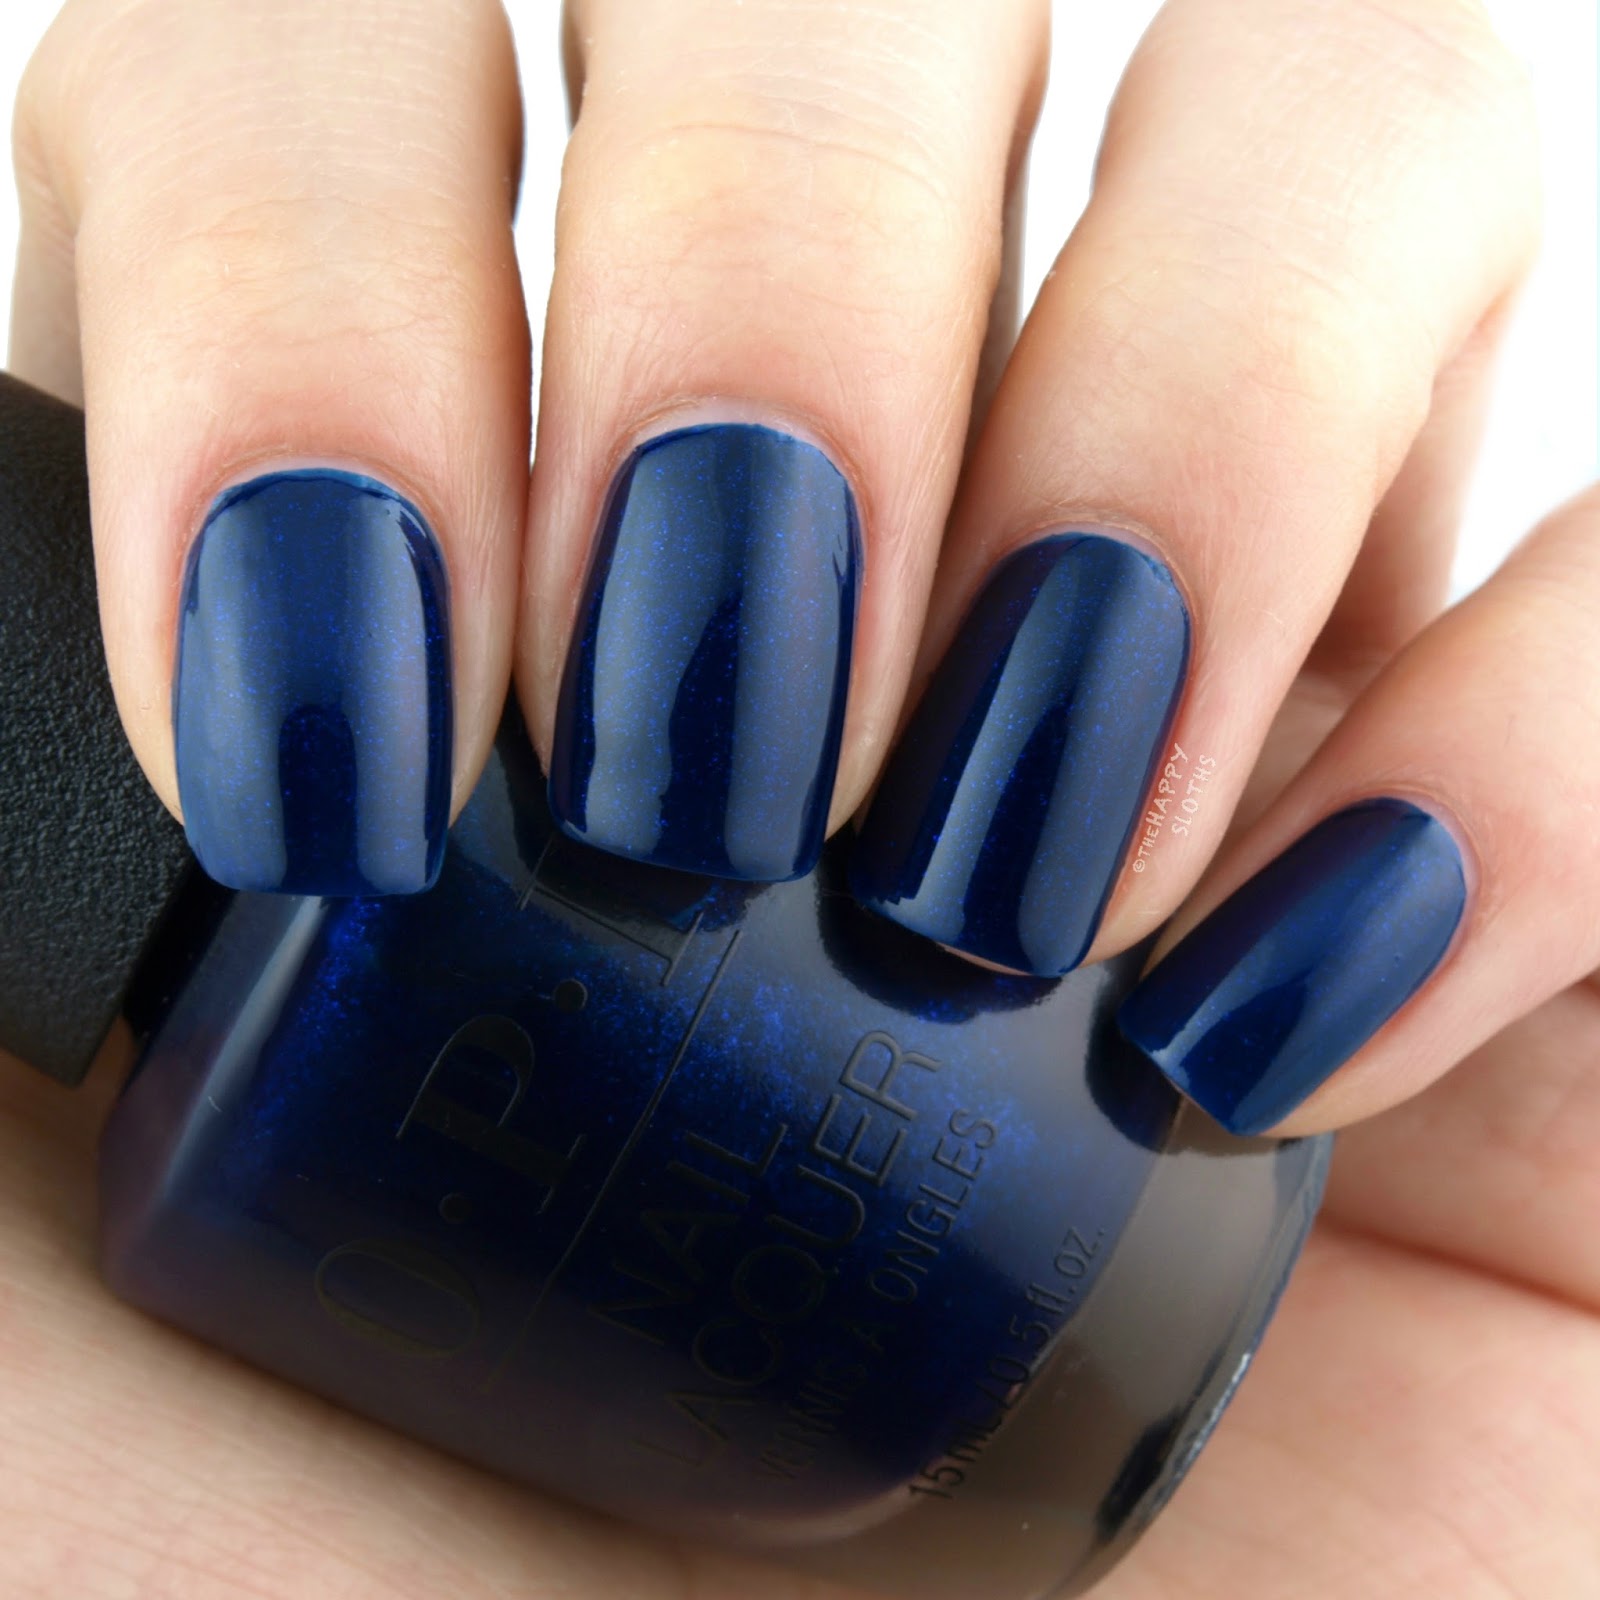 OPI Grease Collection | Chills Are Multiplying!: Review and Swatches